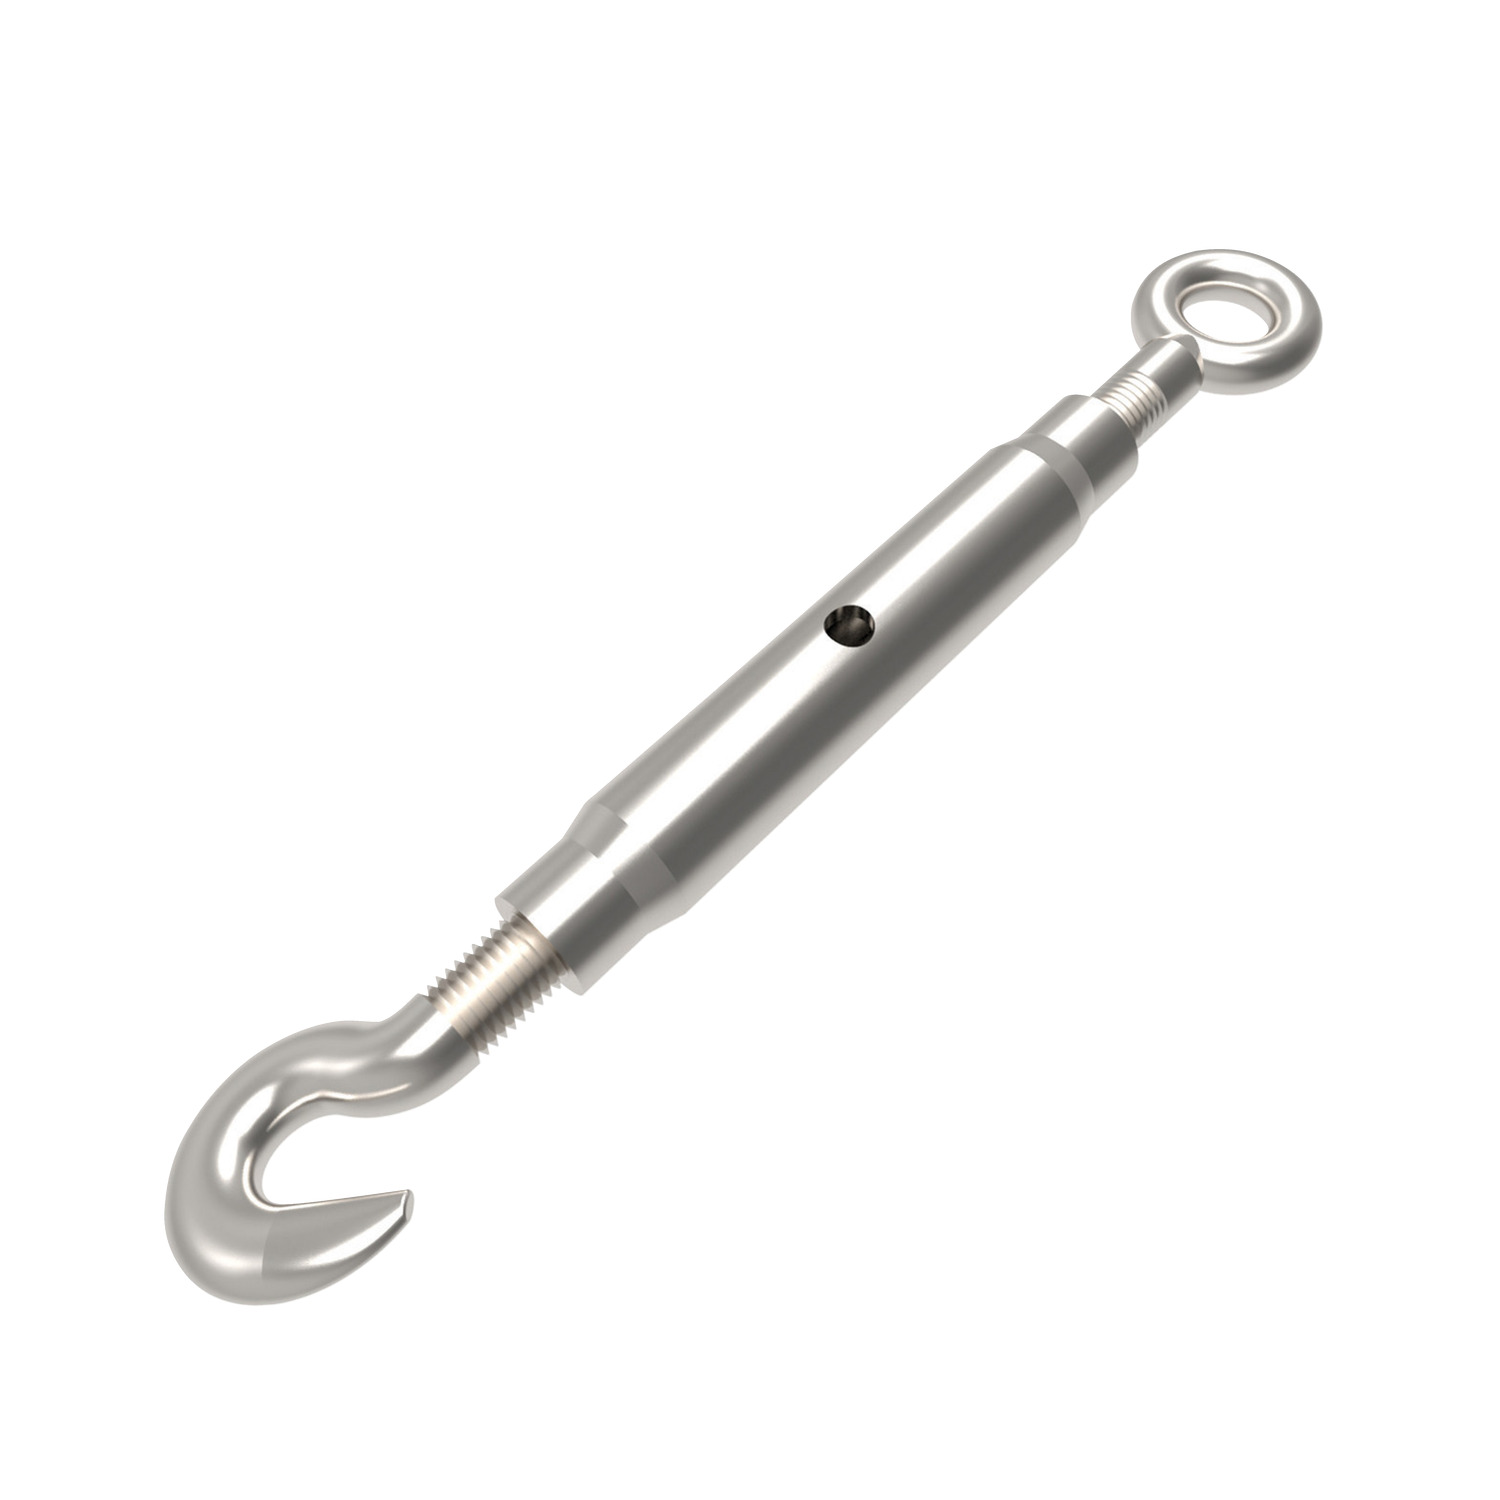 Product R3814, Hook & Eye Pipe Body Turnbuckles stainless steel / 